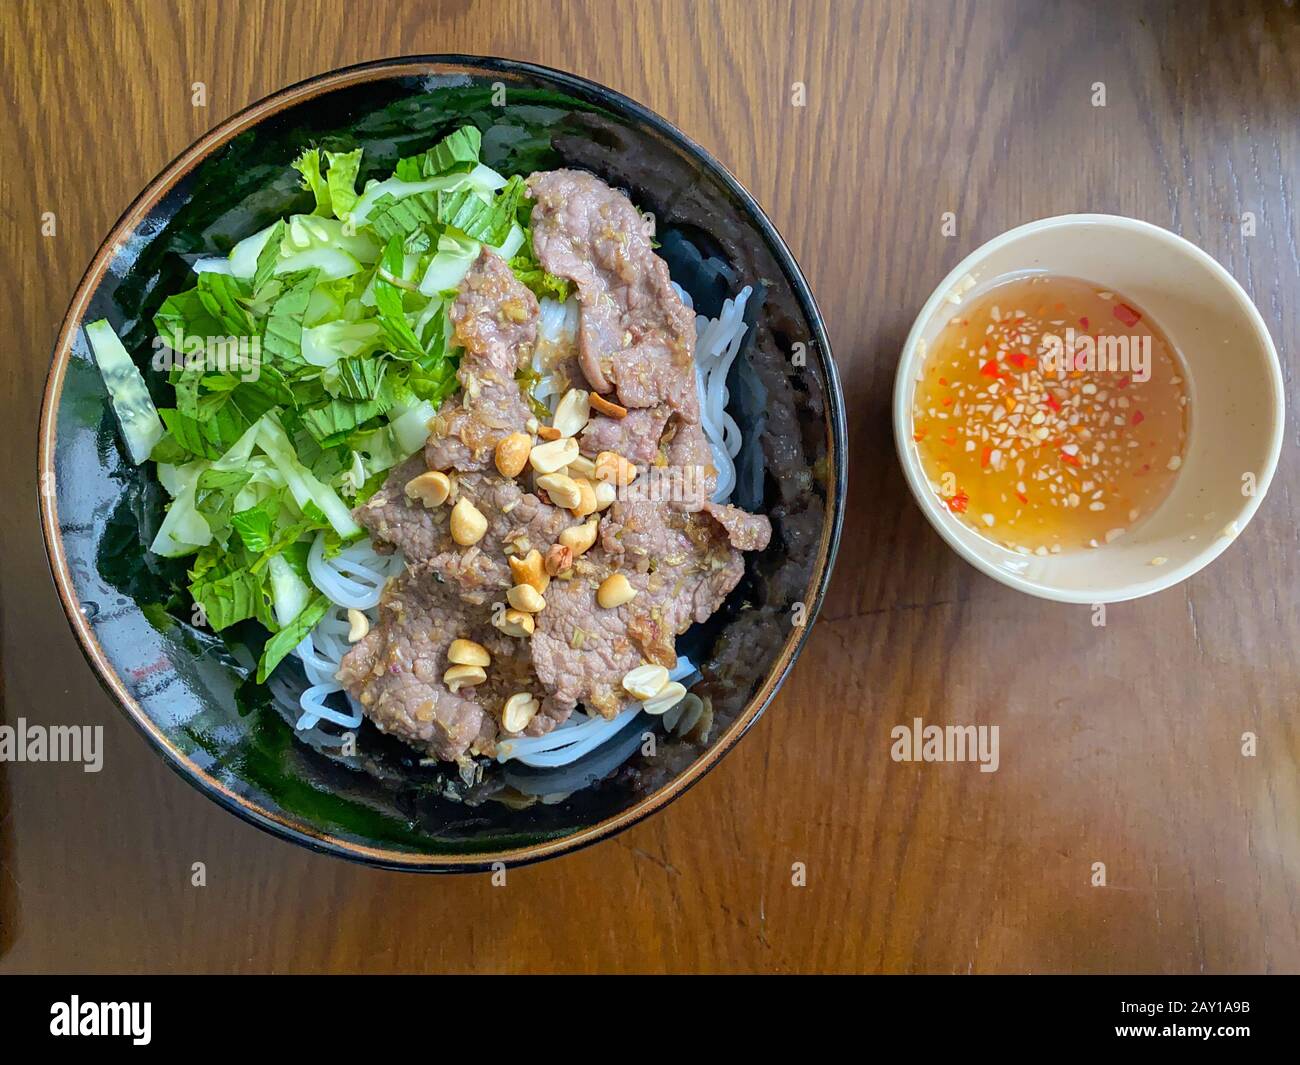 Top view photo of Vietnamese braised beef noodles bowl Stock Photo